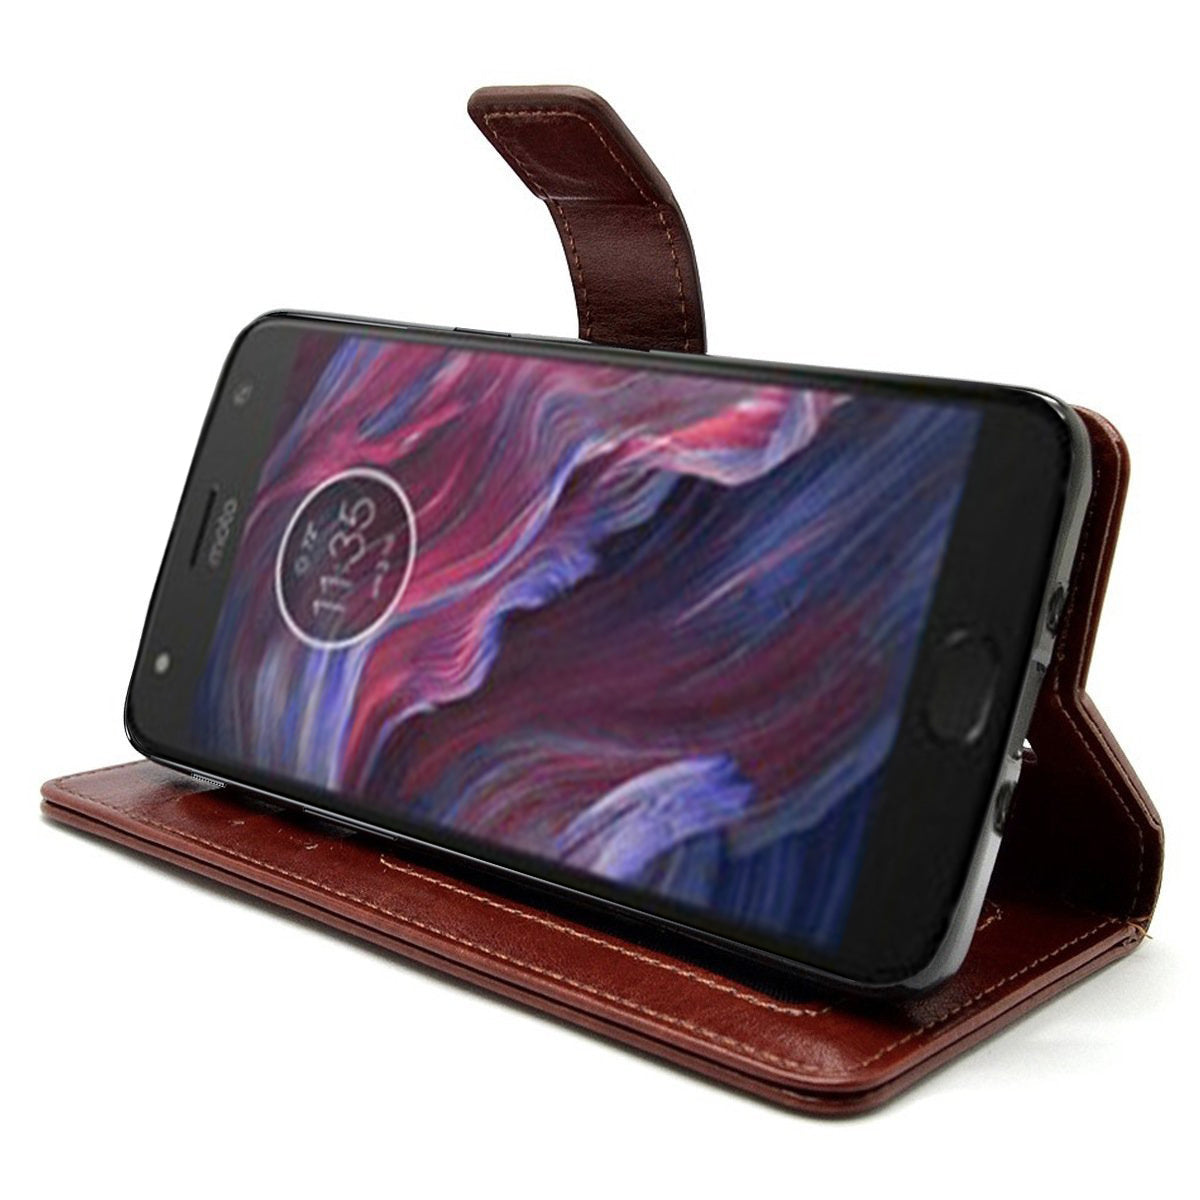 Bracevor Premium Flip Cover Case For Moto X4 | Inner TPU | Leather Wallet Stand - Executive Brown